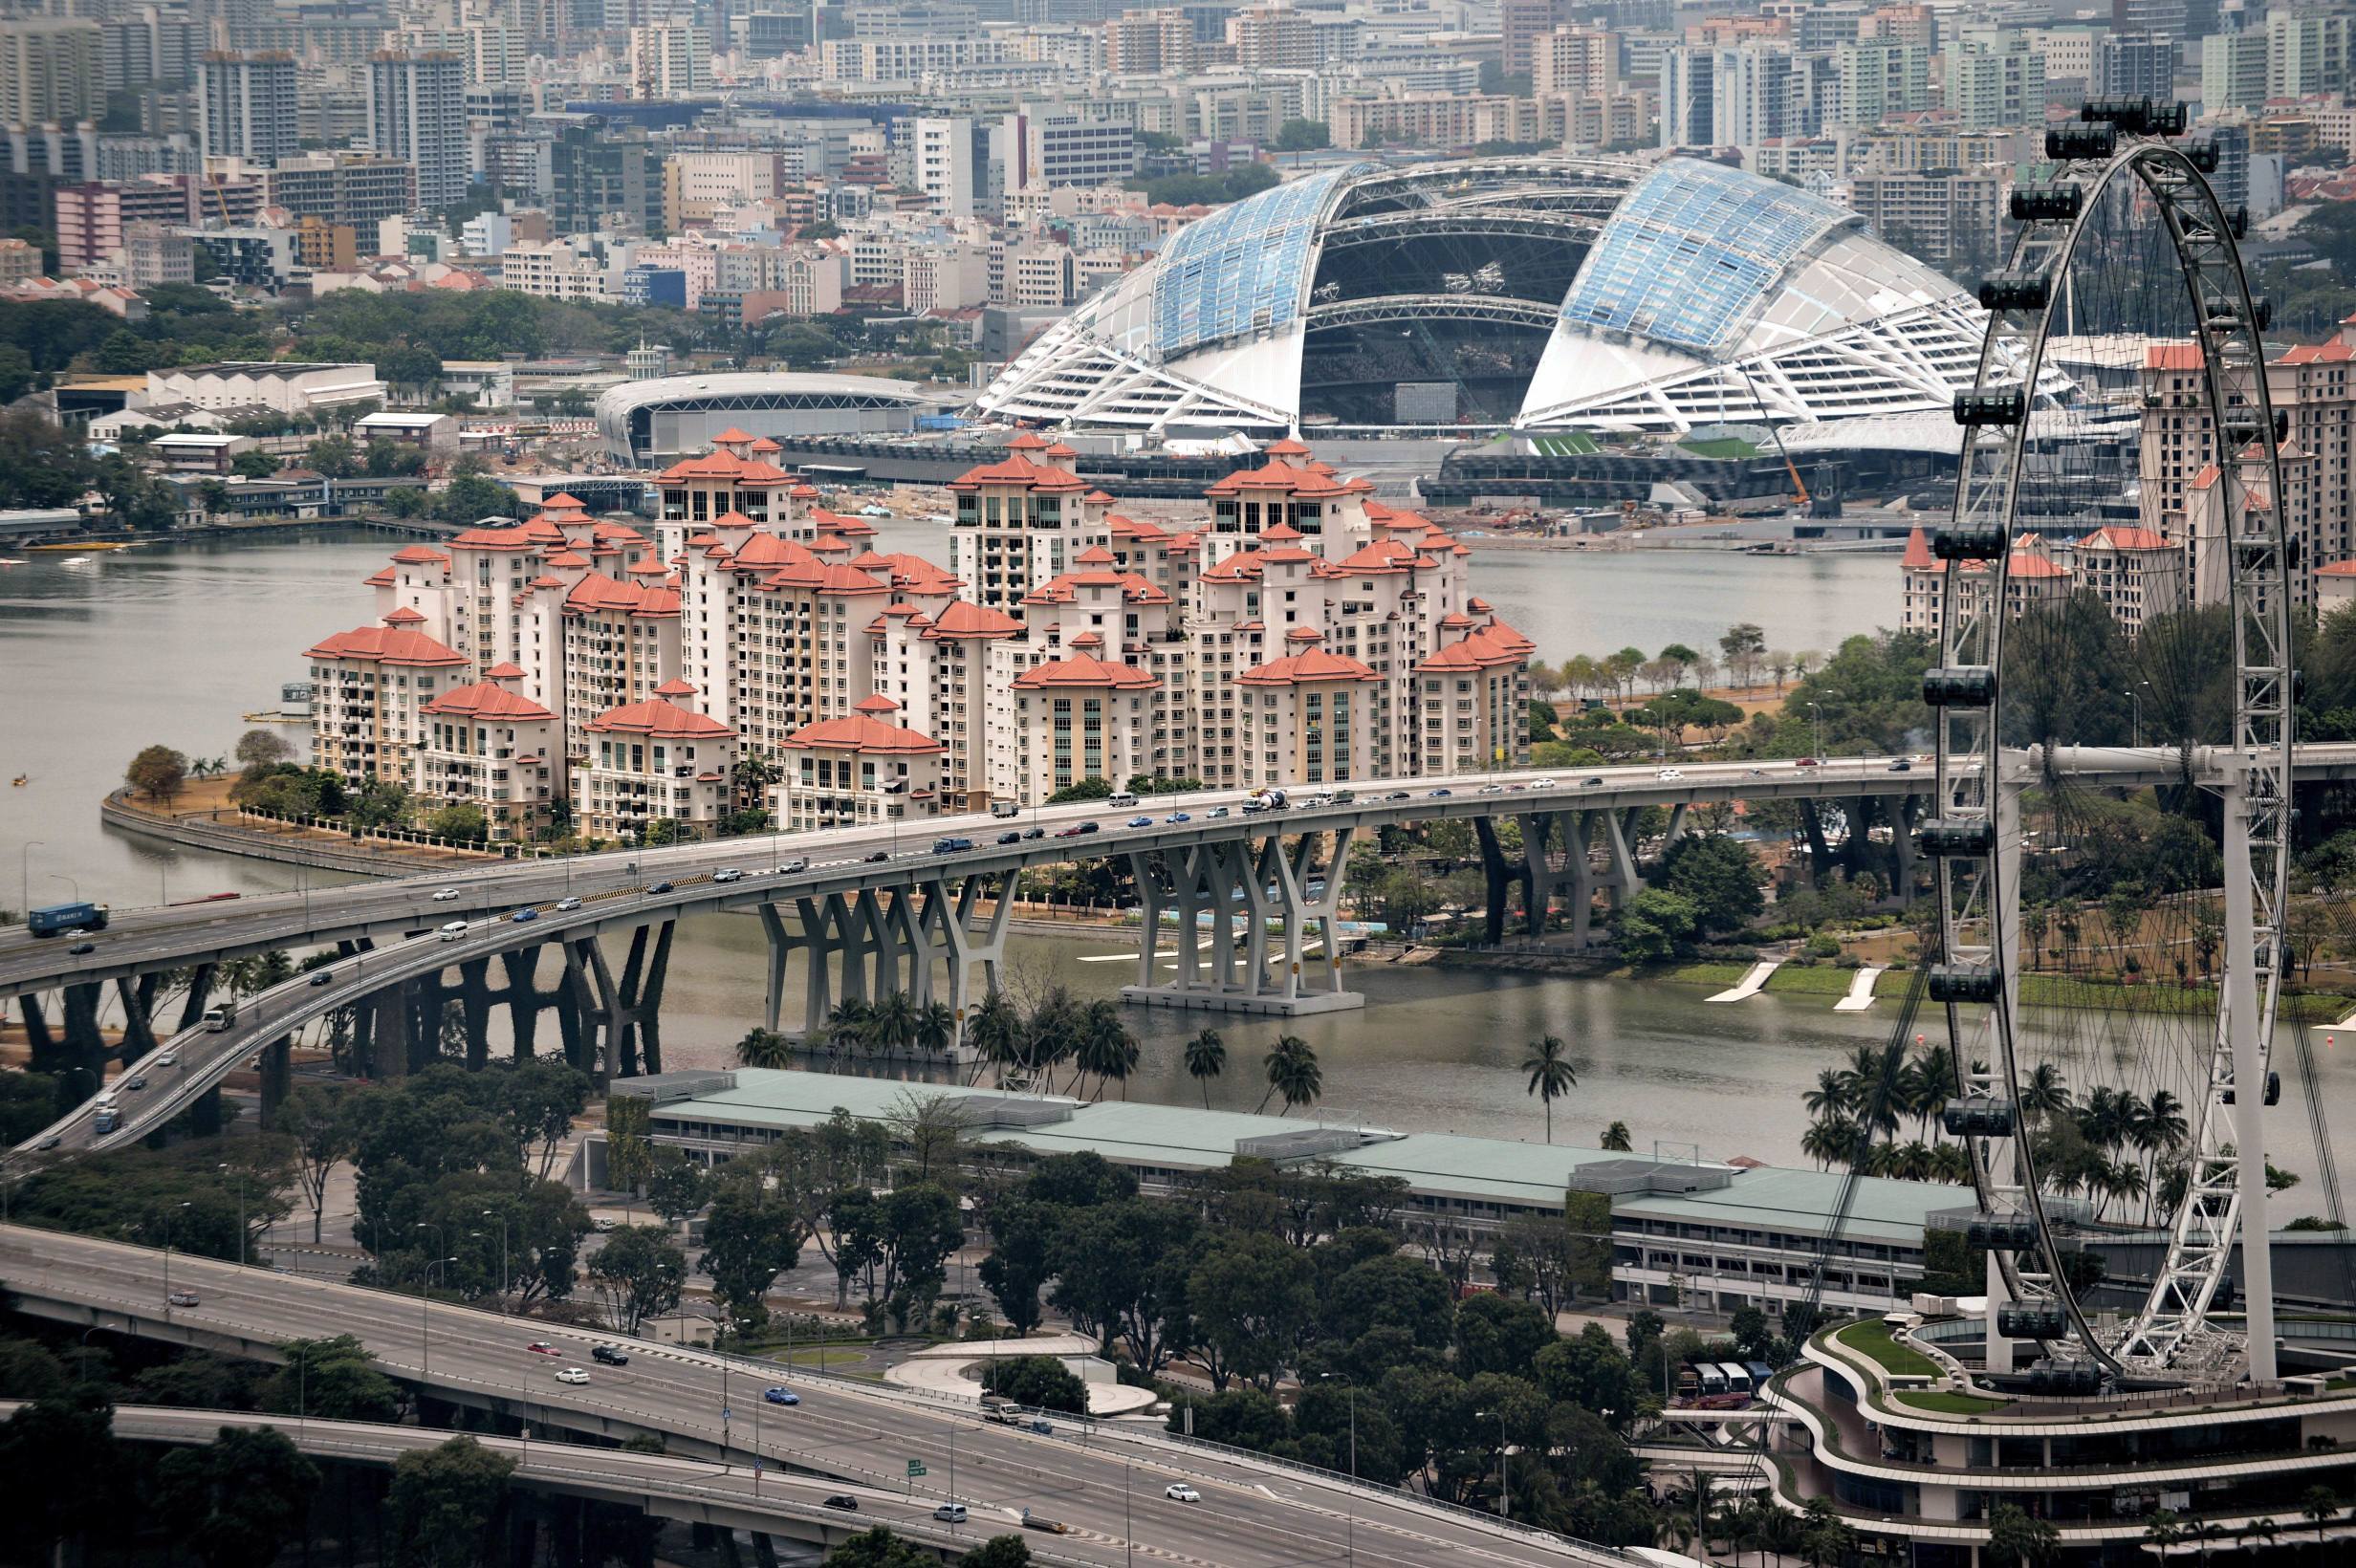 Singapore is known for its clean and even "sterile" living environment. In contrast, Hong Kong's urban development is a more organic process. Photo: AFP